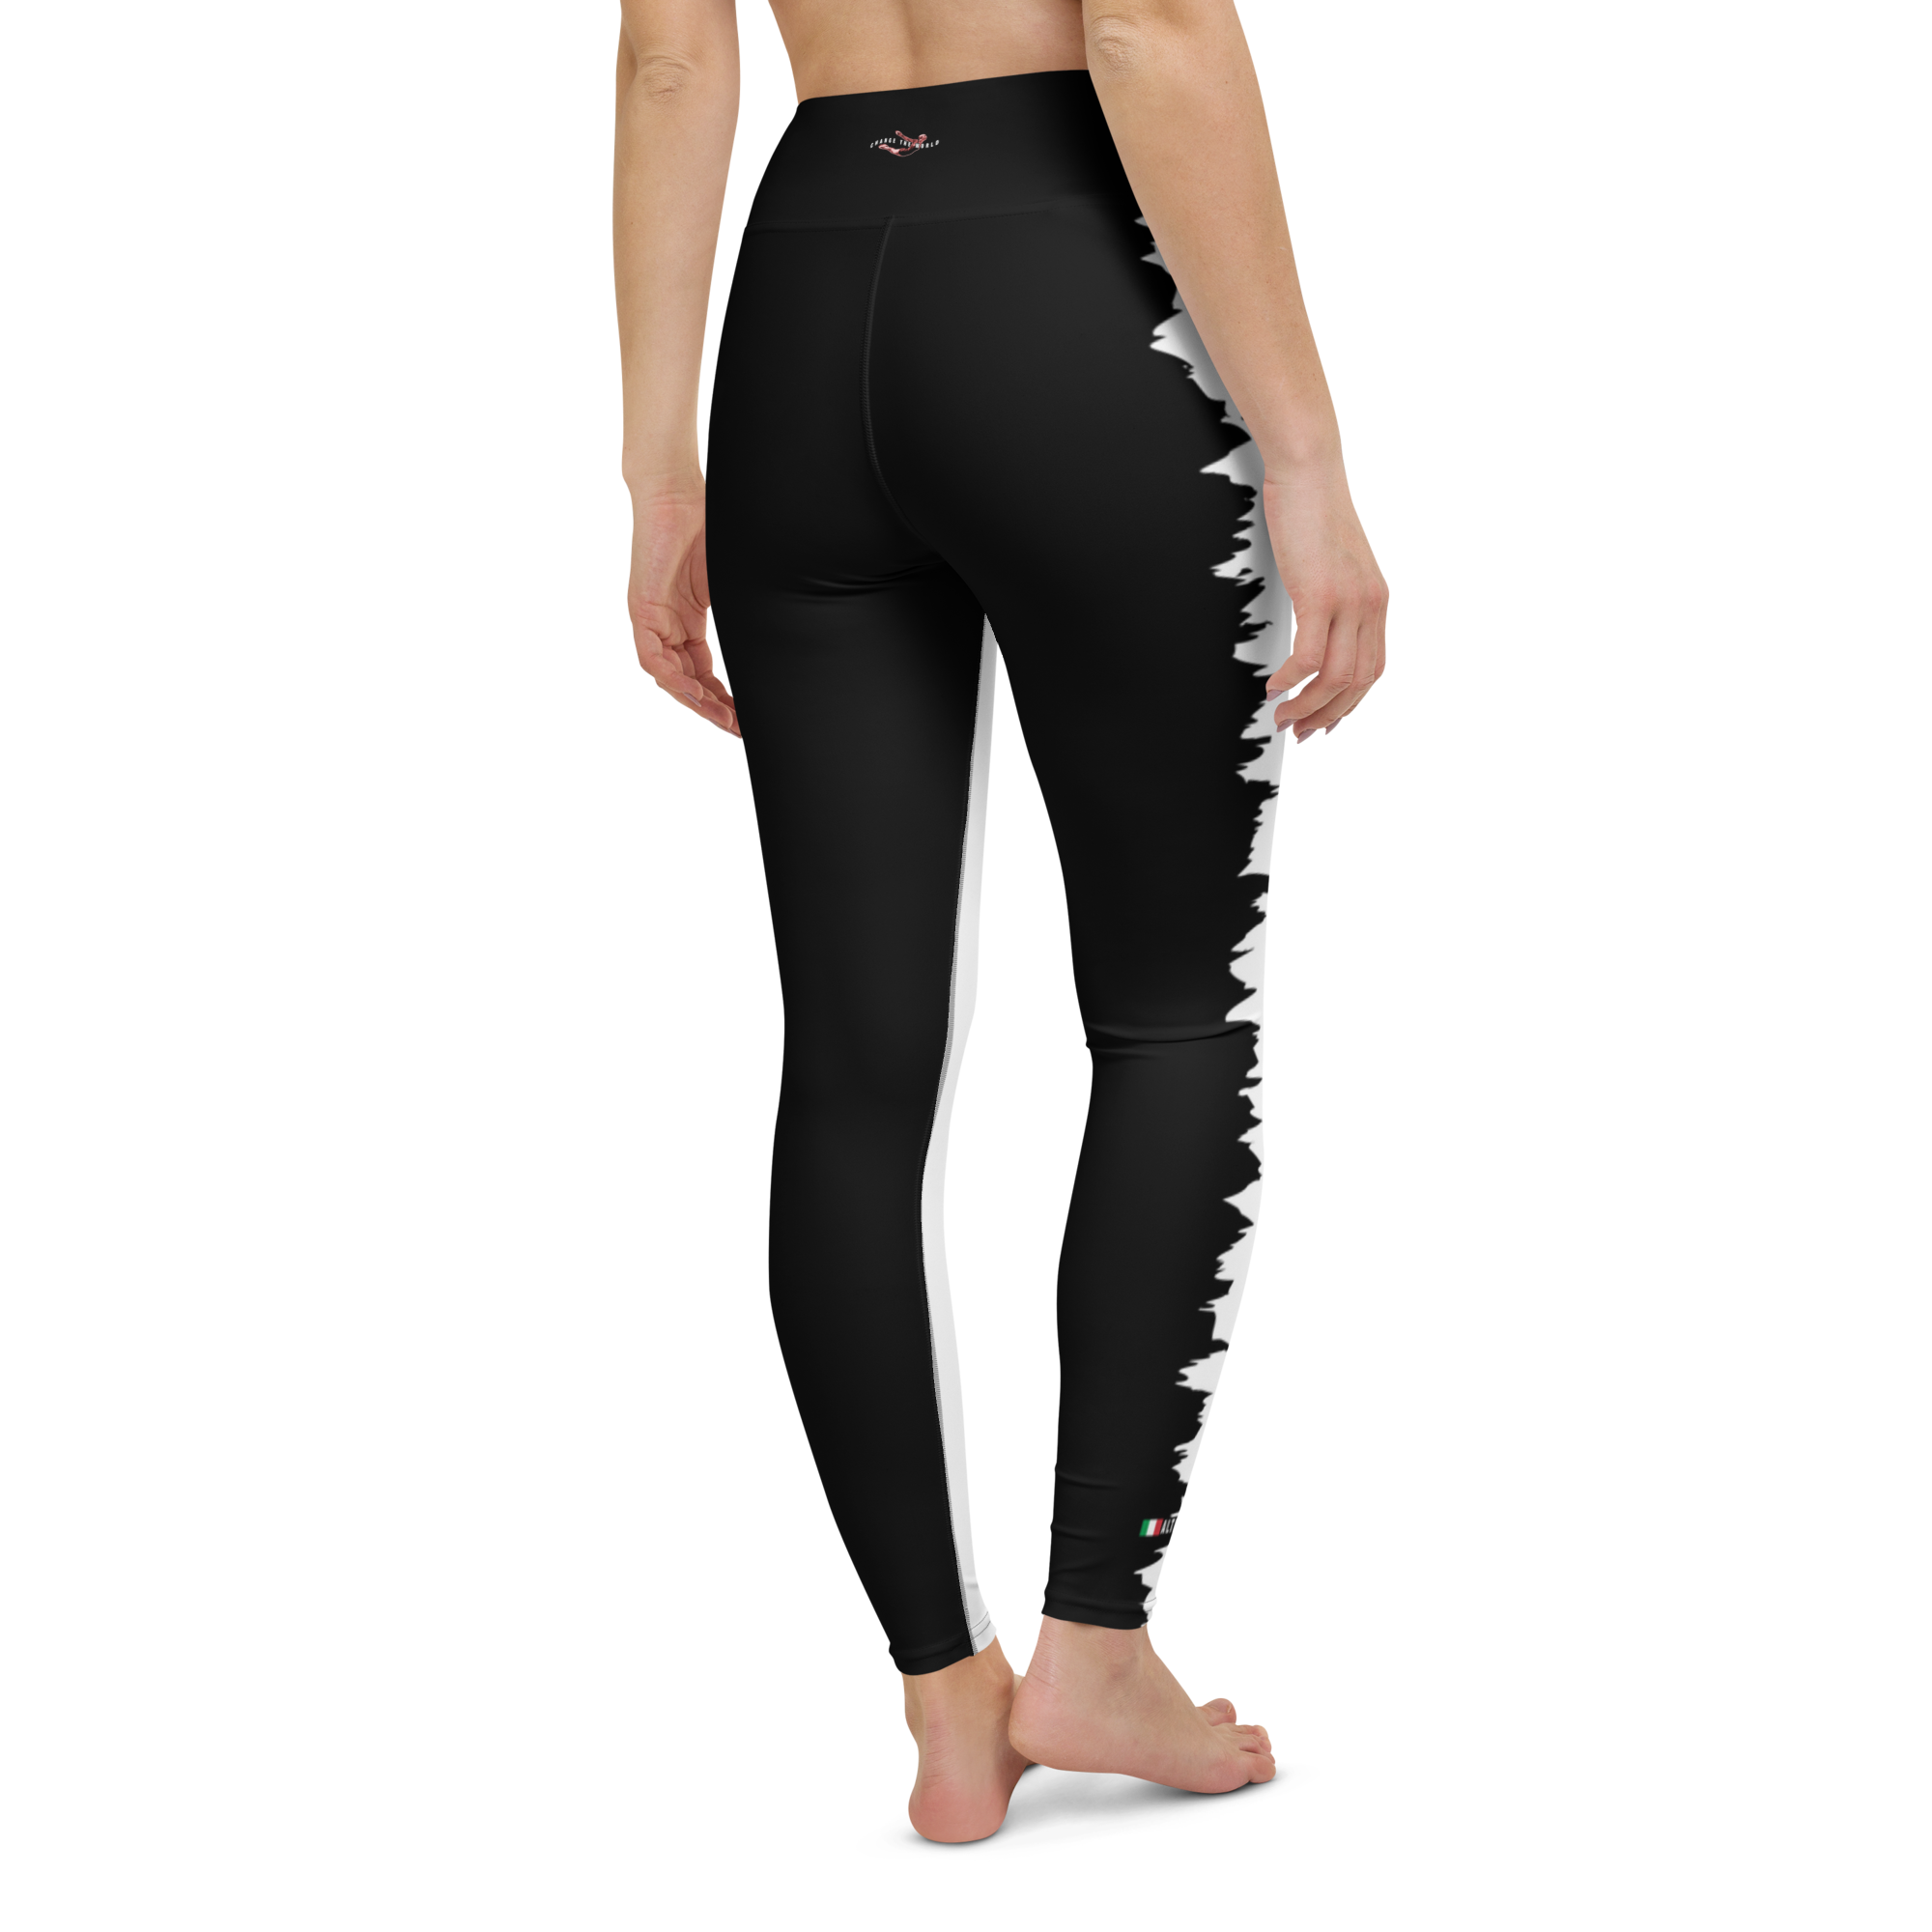 #40192e80 - ALTINO Yoga Pants - Fashion Collection - Stop Plastic Packaging - #PlasticCops - Apparel - Accessories - Clothing For Girls - Women